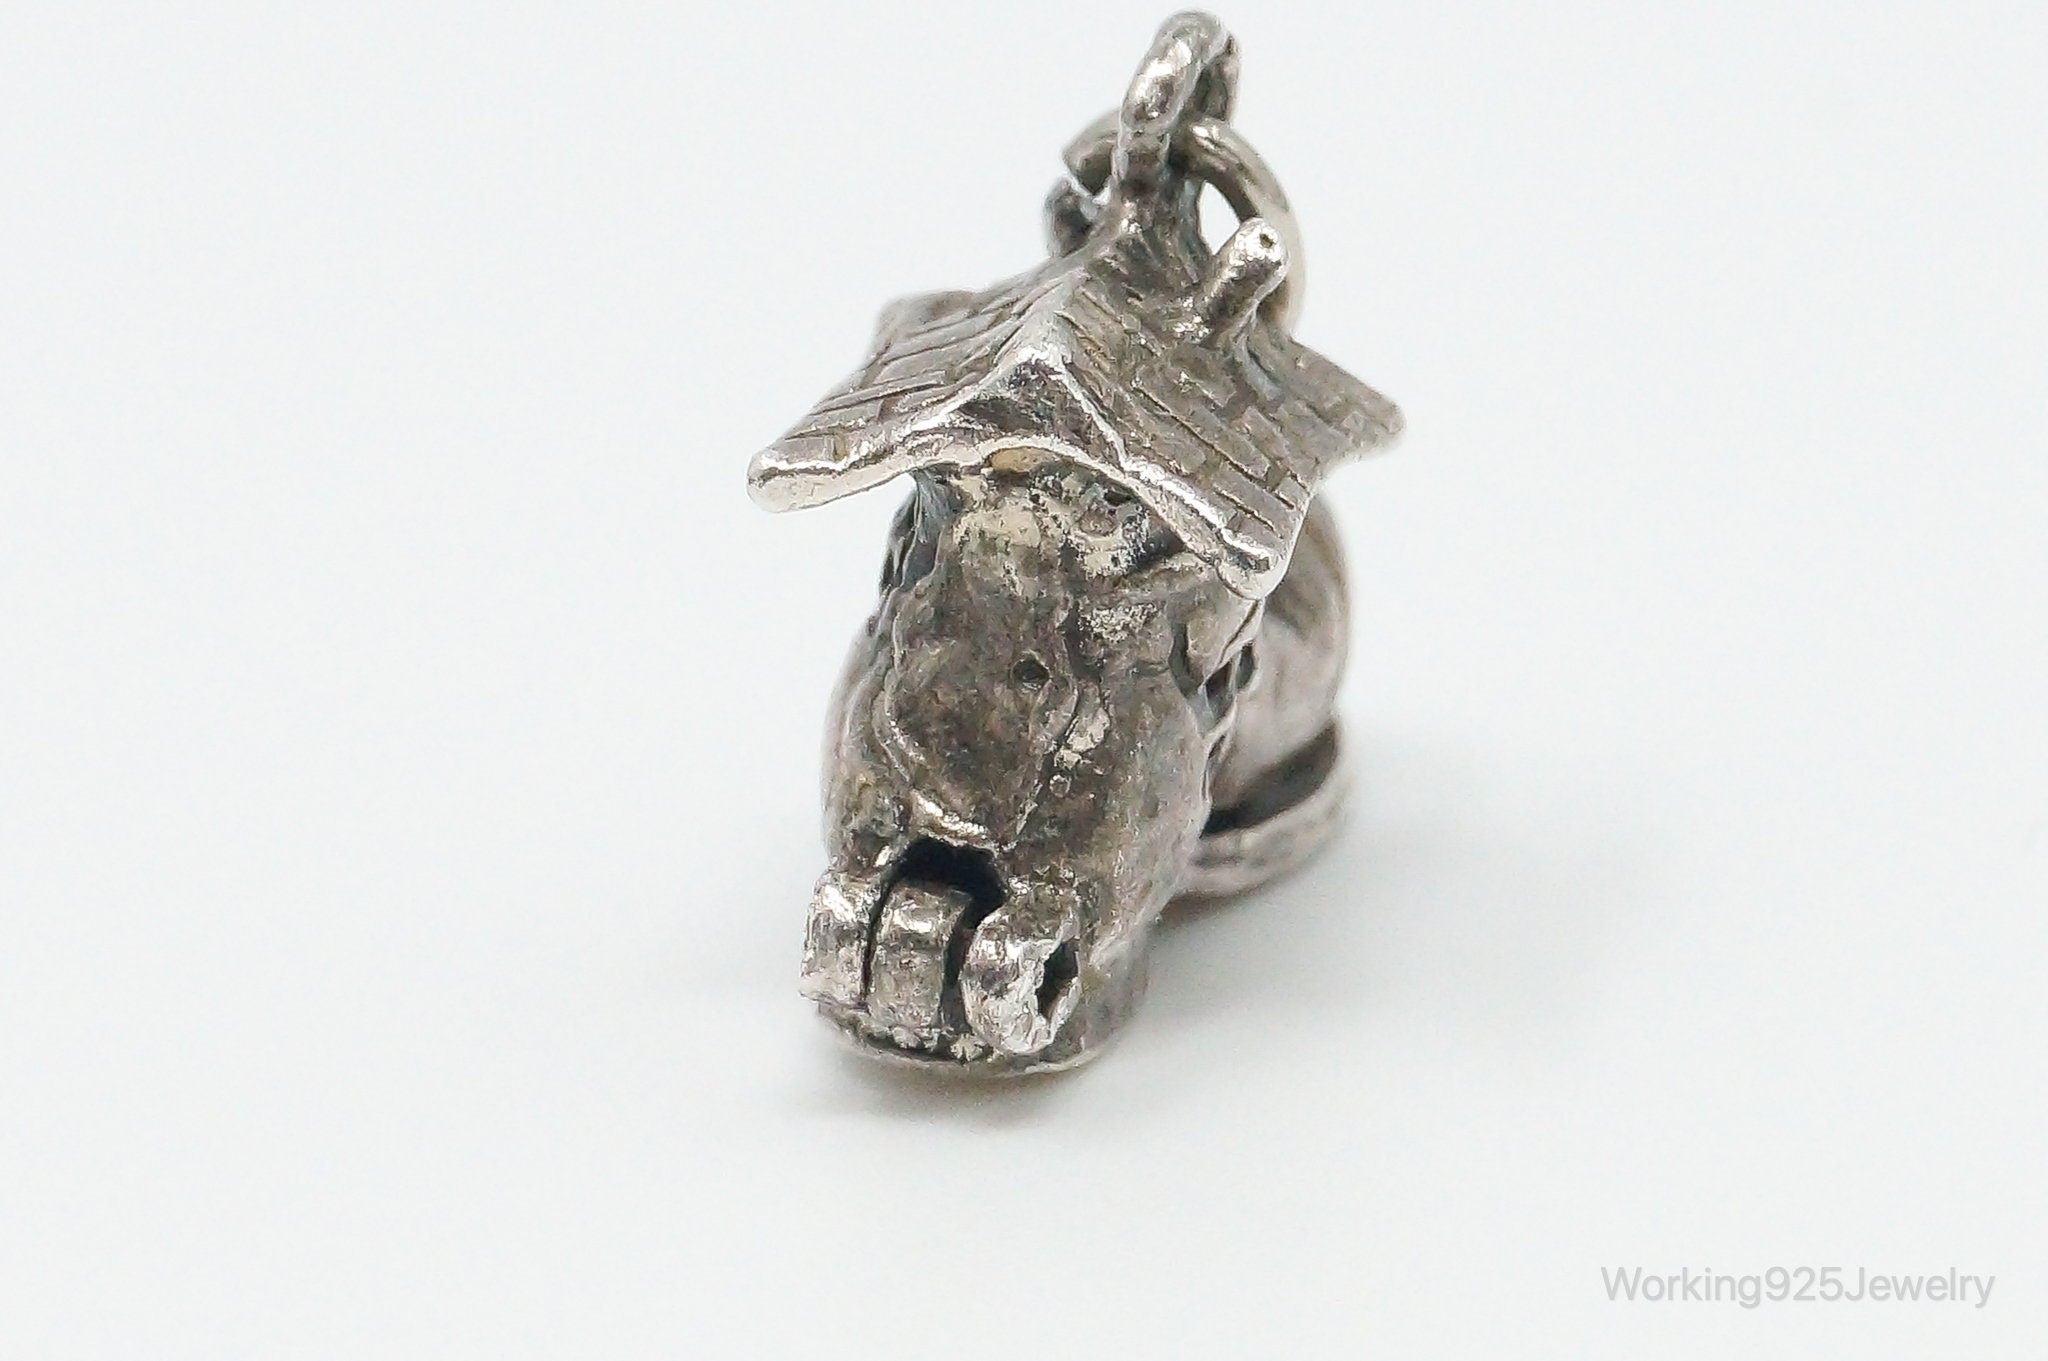 Vintage Old Lady in the Shoe Sterling Silver Charm